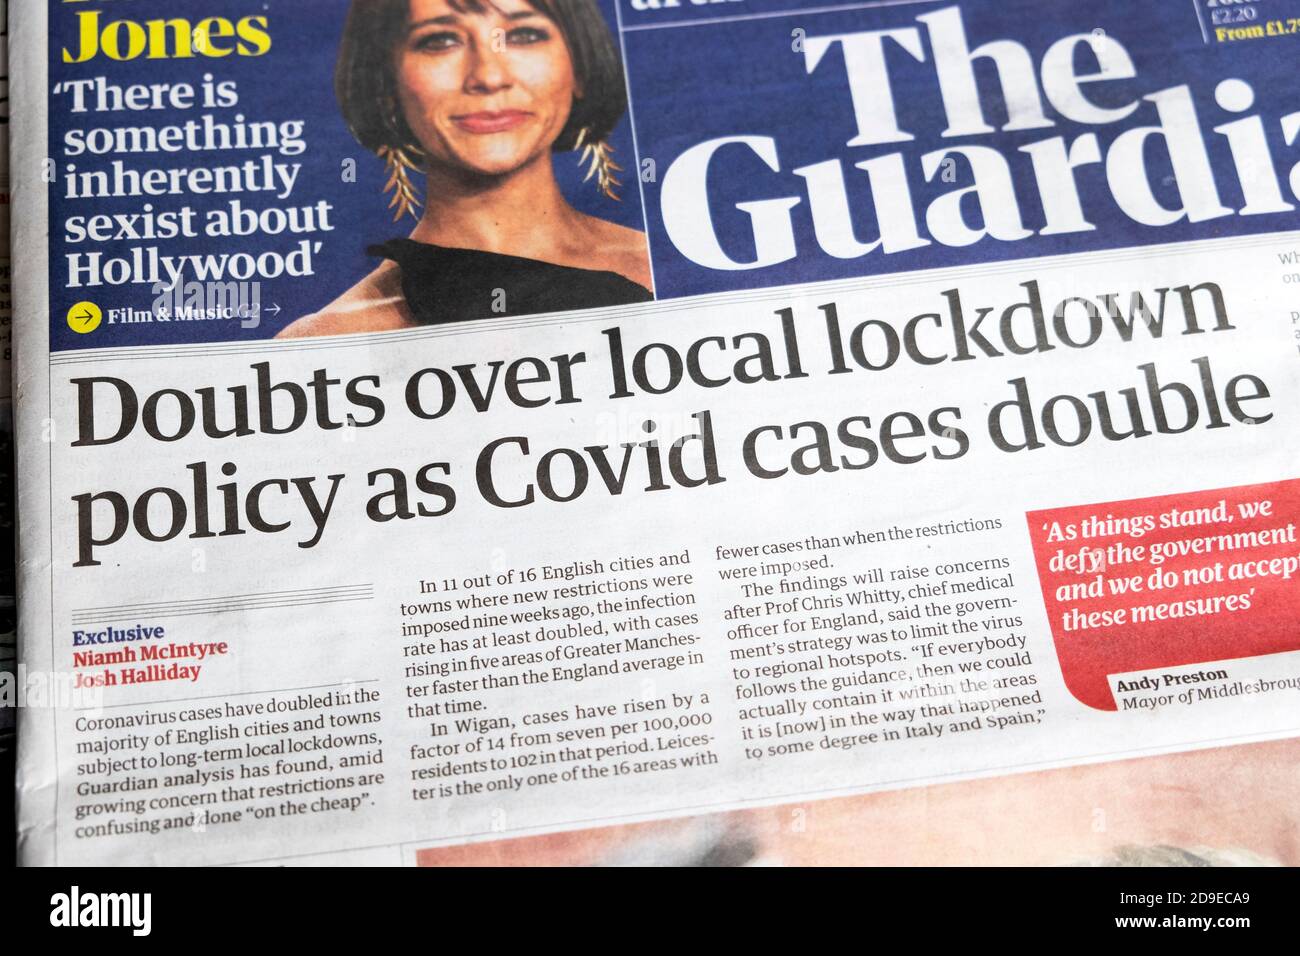 'Doubts over local lockdown policy as Covid cases double' The Guardian newspaper front page headline on 2 October 2020 London England UK Stock Photo